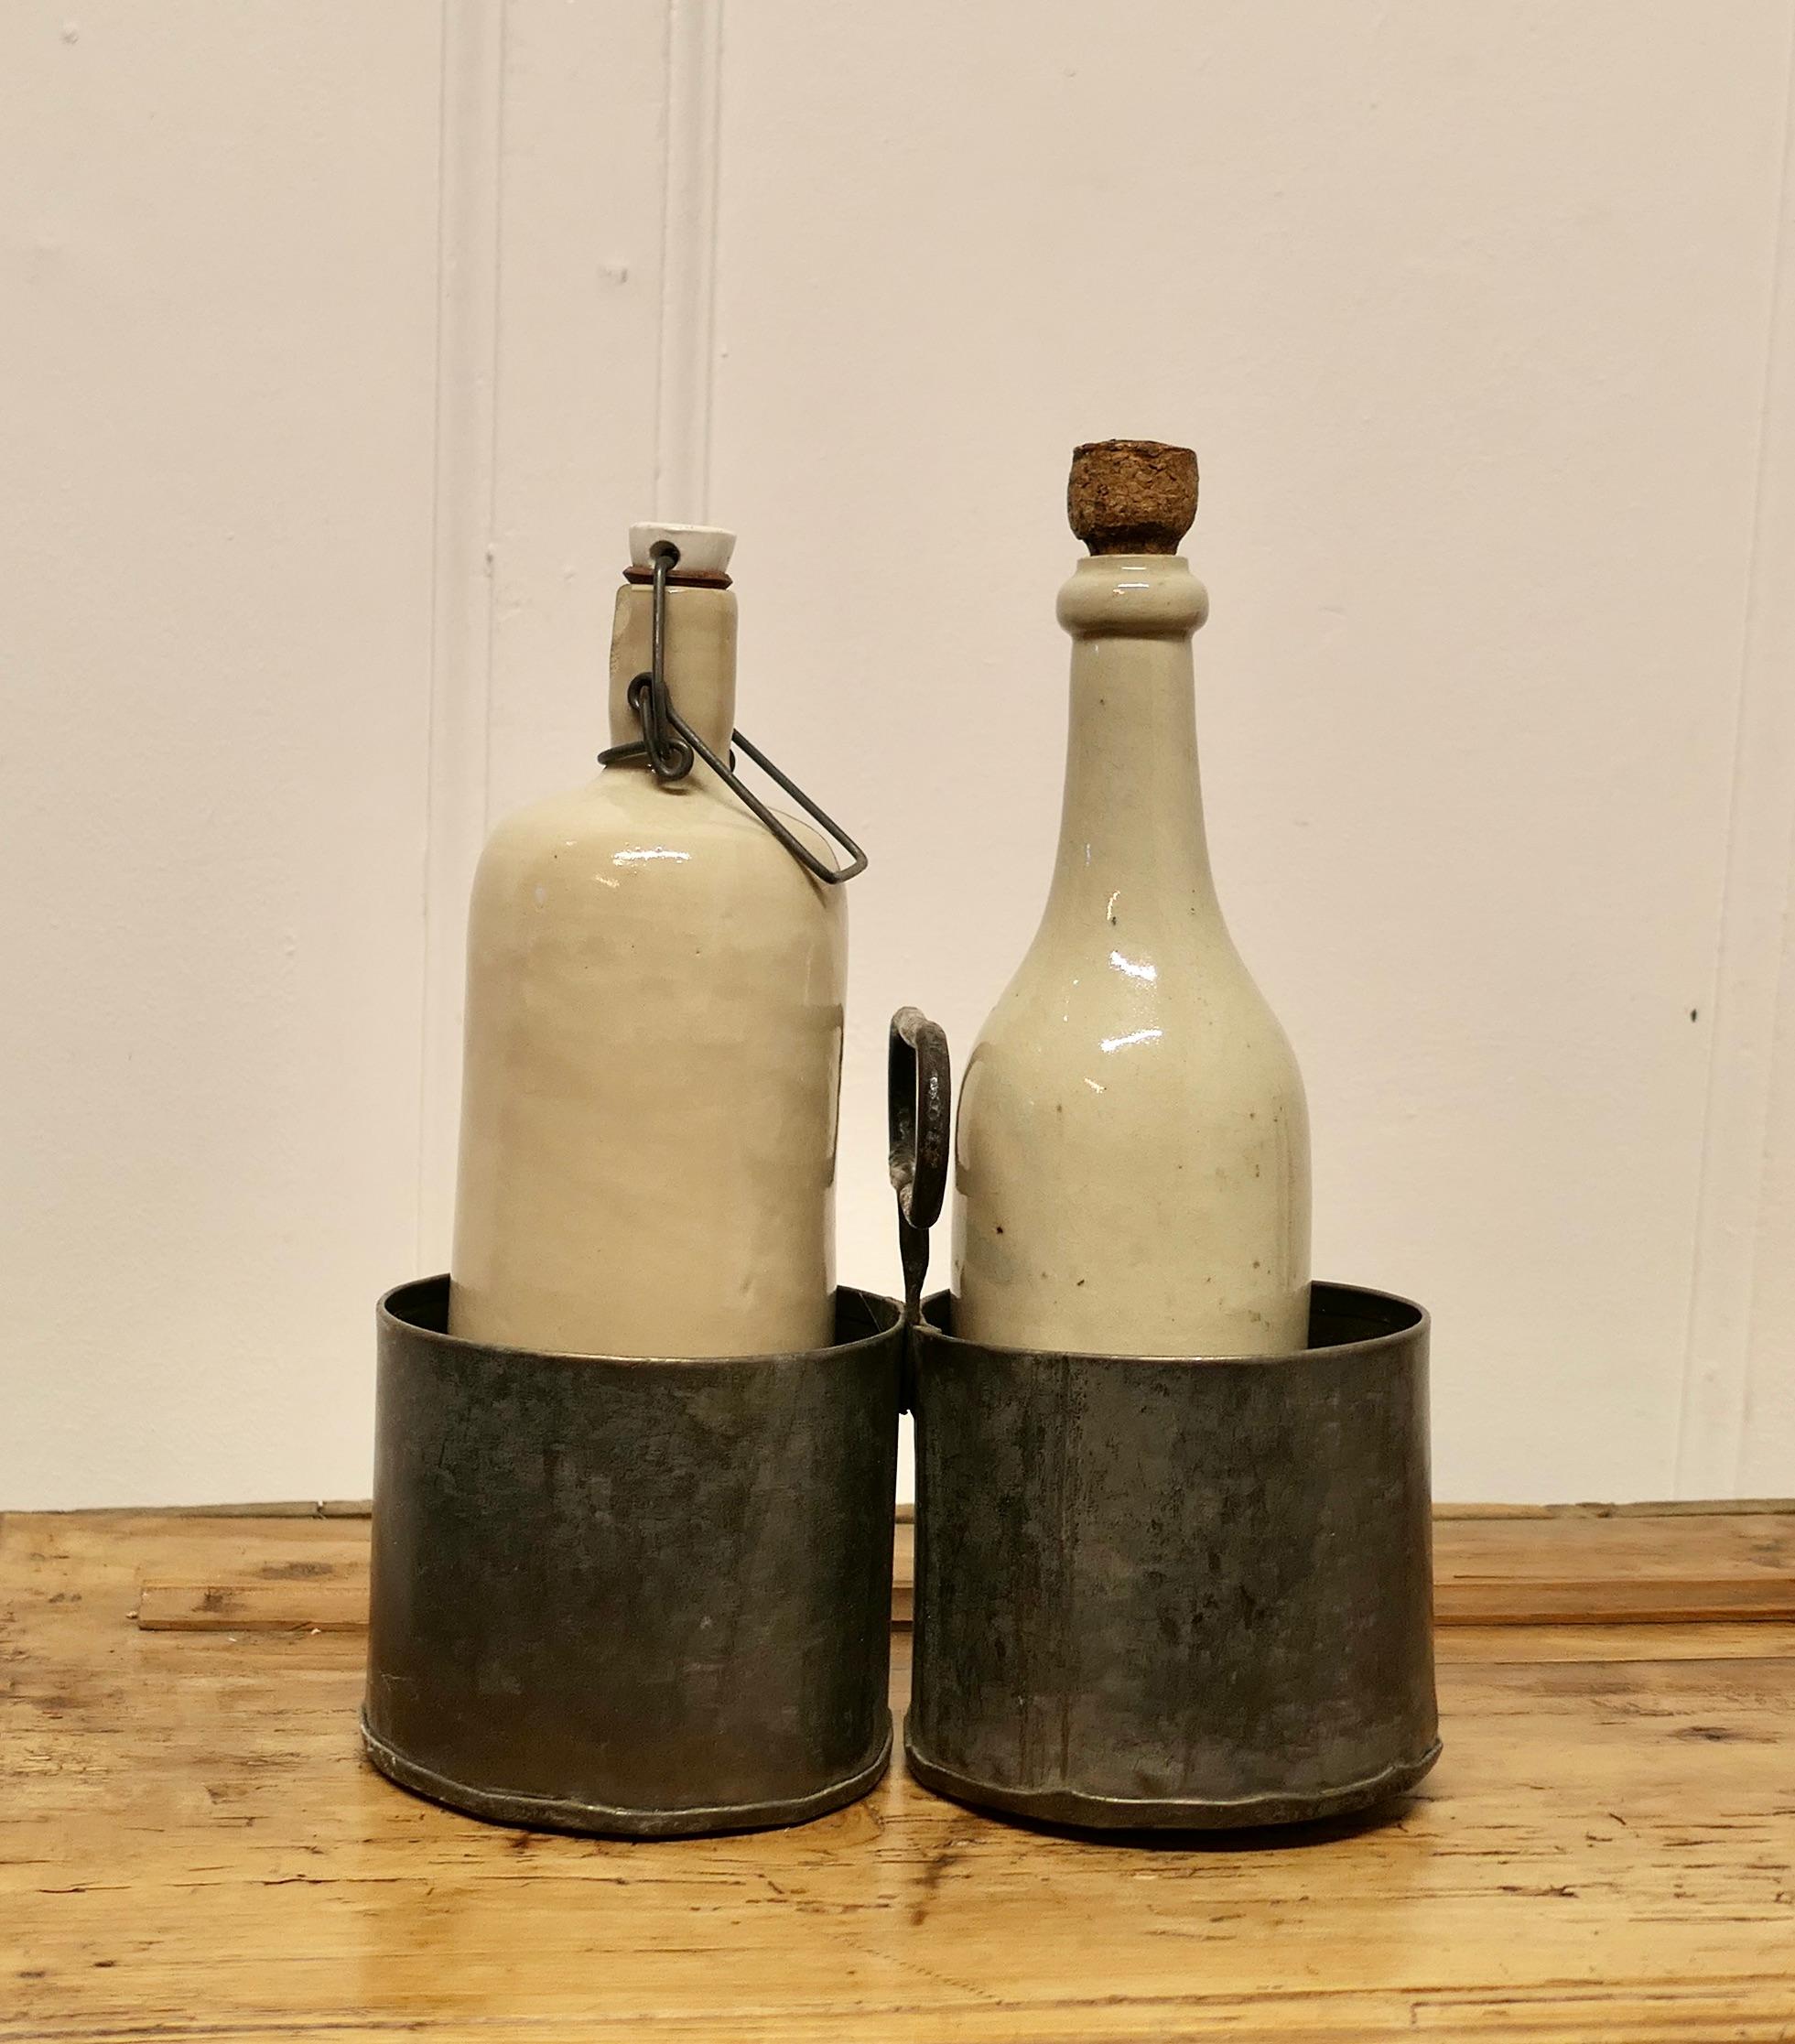  Useful French Rustic Twin Bottle Carrier, Coaster

Great little piece, very useful to pass tall bottles around the table and to keep them from getting knocked over
The Coaster holds 2 bottles with a handle in the centre, it is made in strong